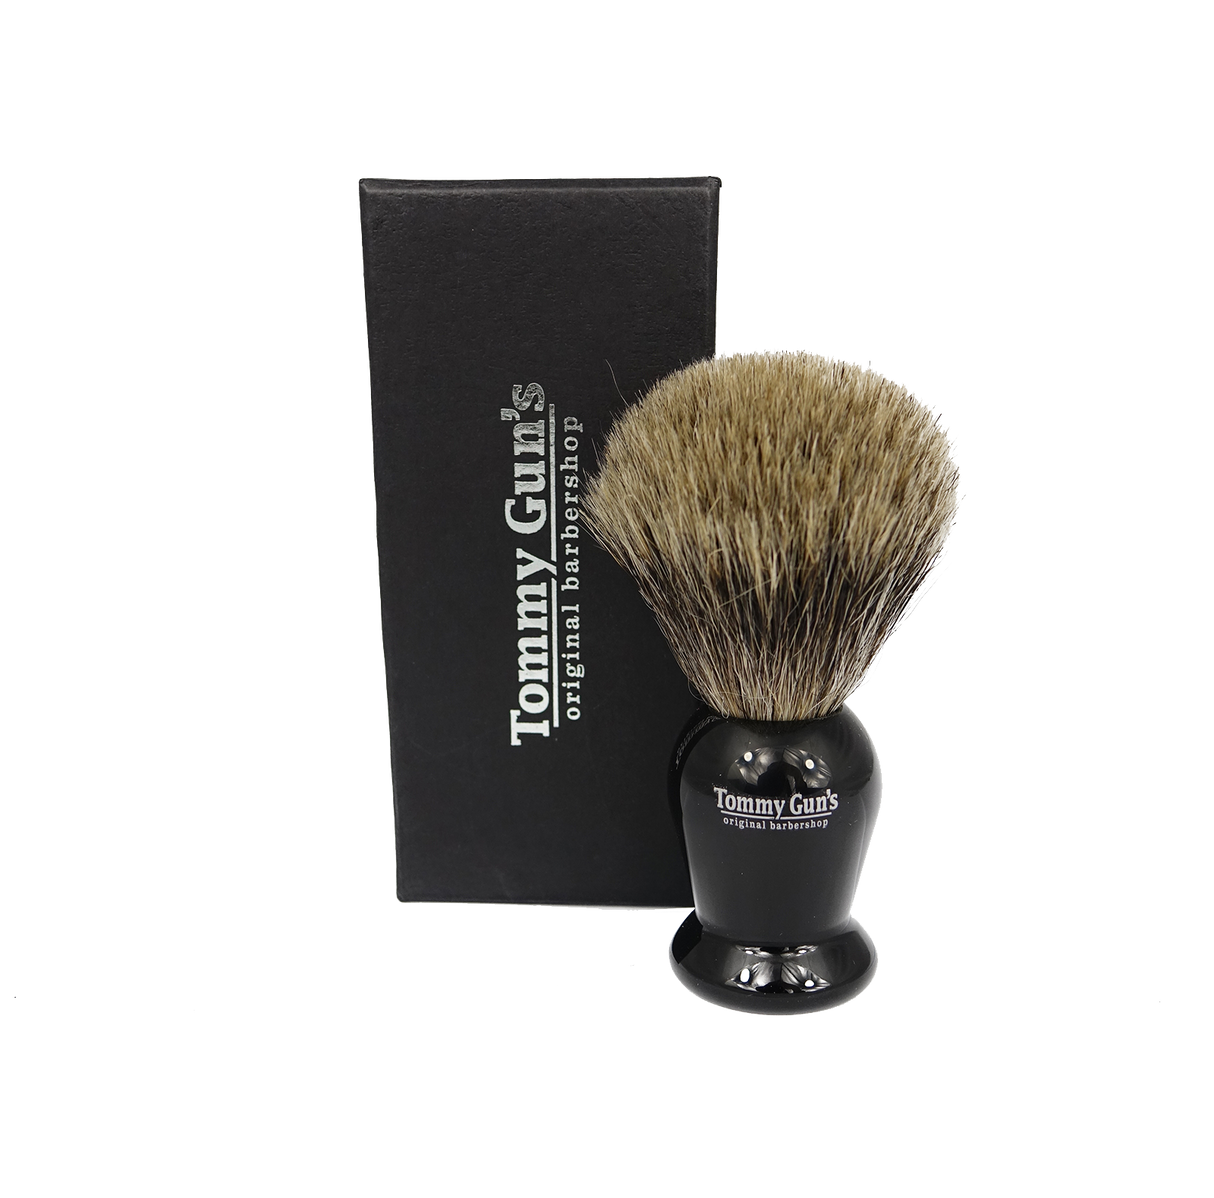 Tommy Gun's Shave Tommy Guns Shave Brush Faux Horn Handle 20mm Pure Badger SI20-EB10